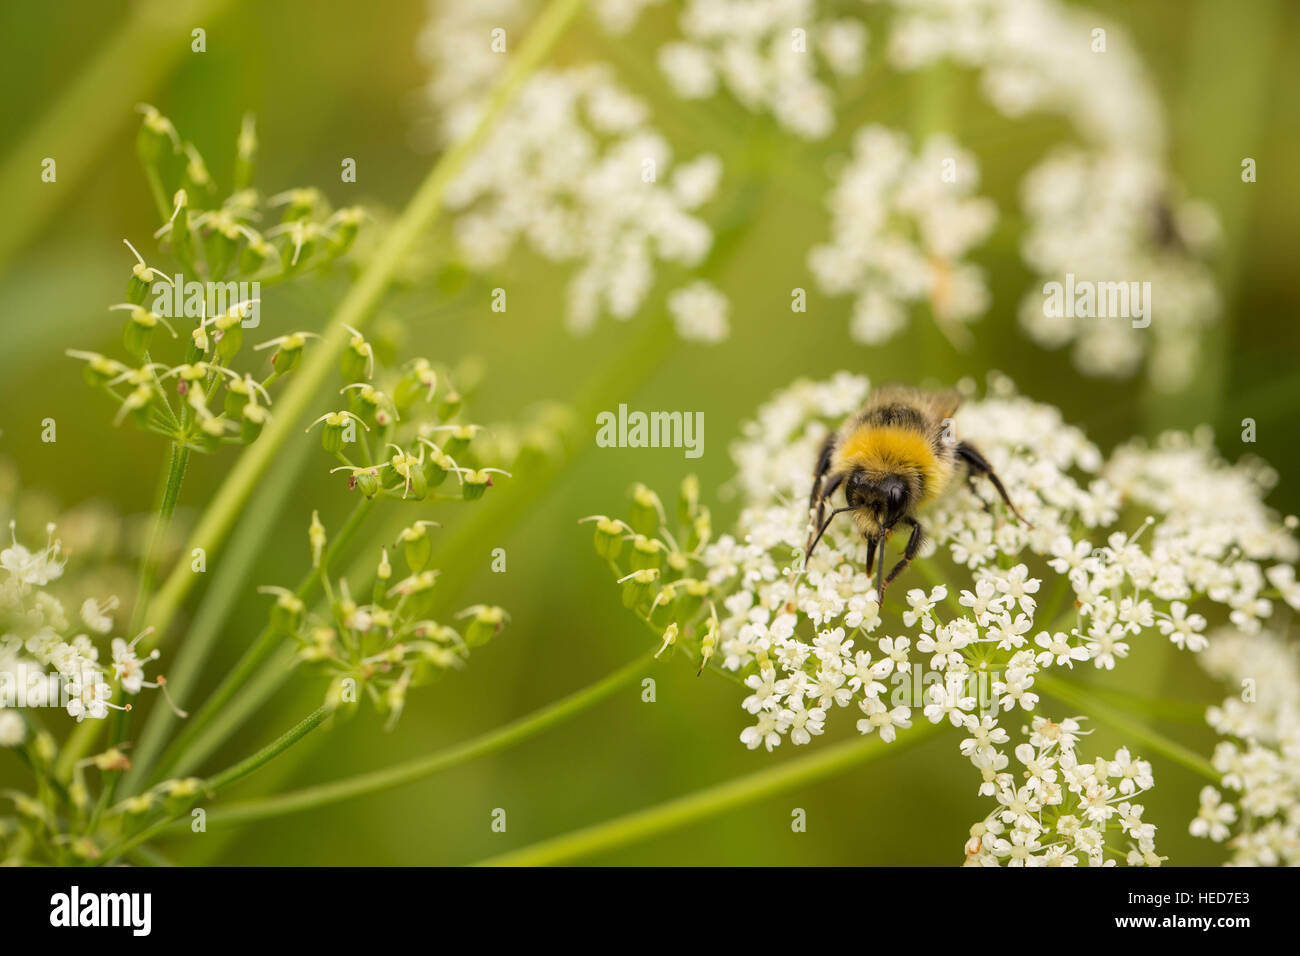 4-season summer,animal,bee,black,bug,bumble,bumble-bee,bumblebee,busy,buzz,close-up,face,flower,fly,garden,green,hairy,honey,isolated,macro,summer,white,wild,wildflower,wings,yellow Stock Photo